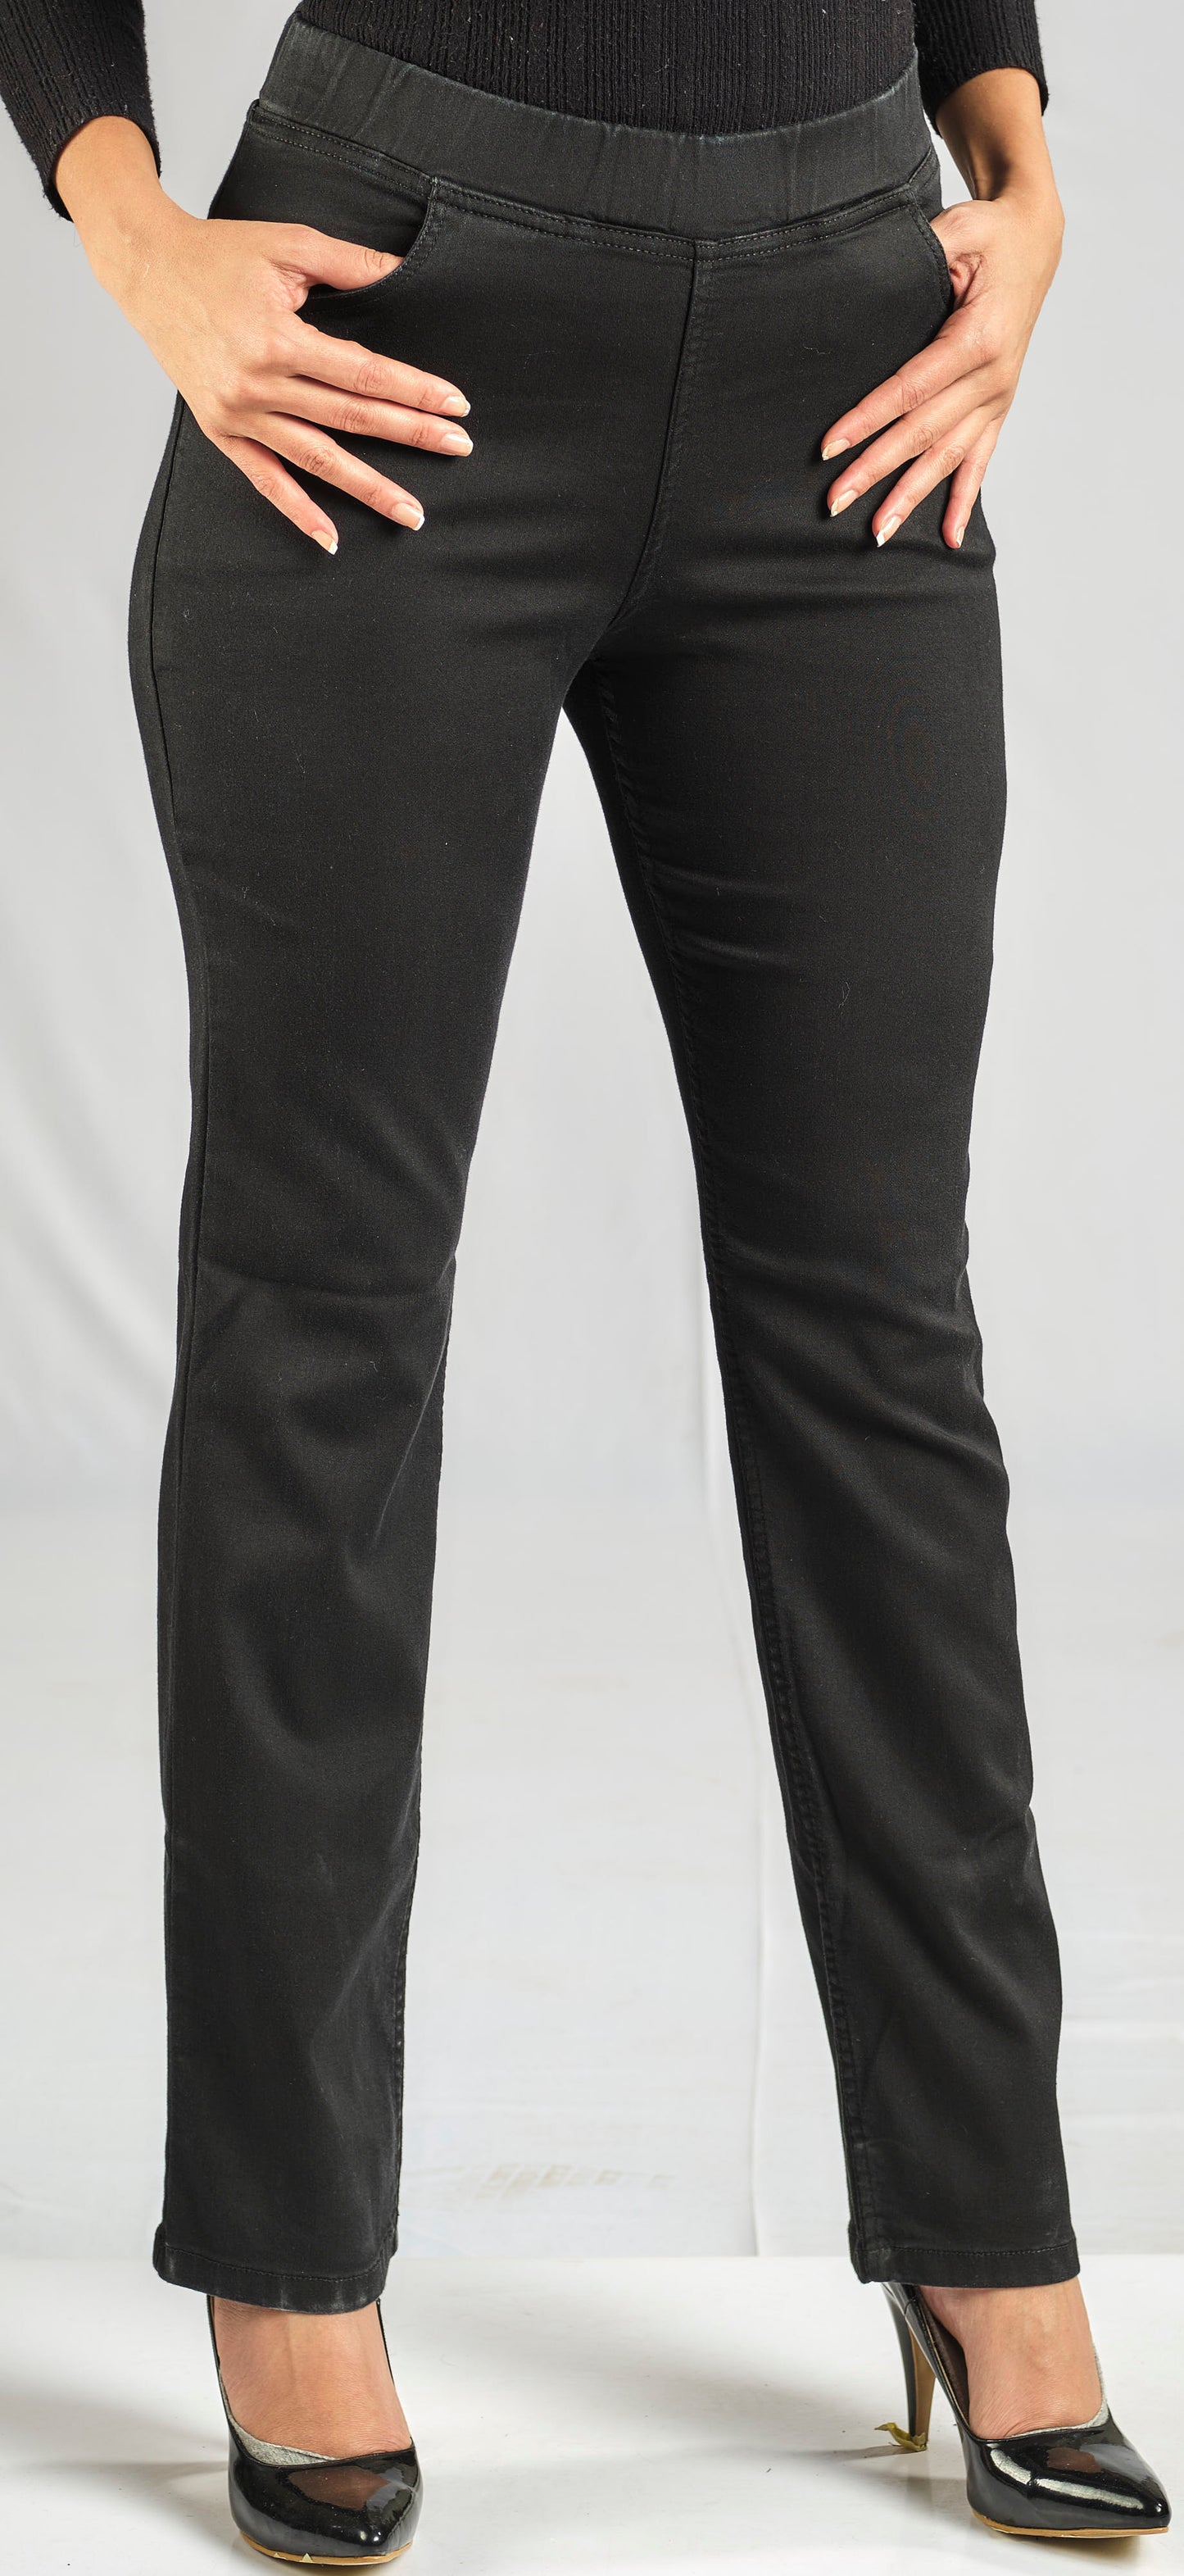 PREMIUM COTTON LYCRA STRAIGHT CUT JEANS WITH NO ZIPPER AND ELASTIC WAIST BAND FOR EXTRA COMFORT